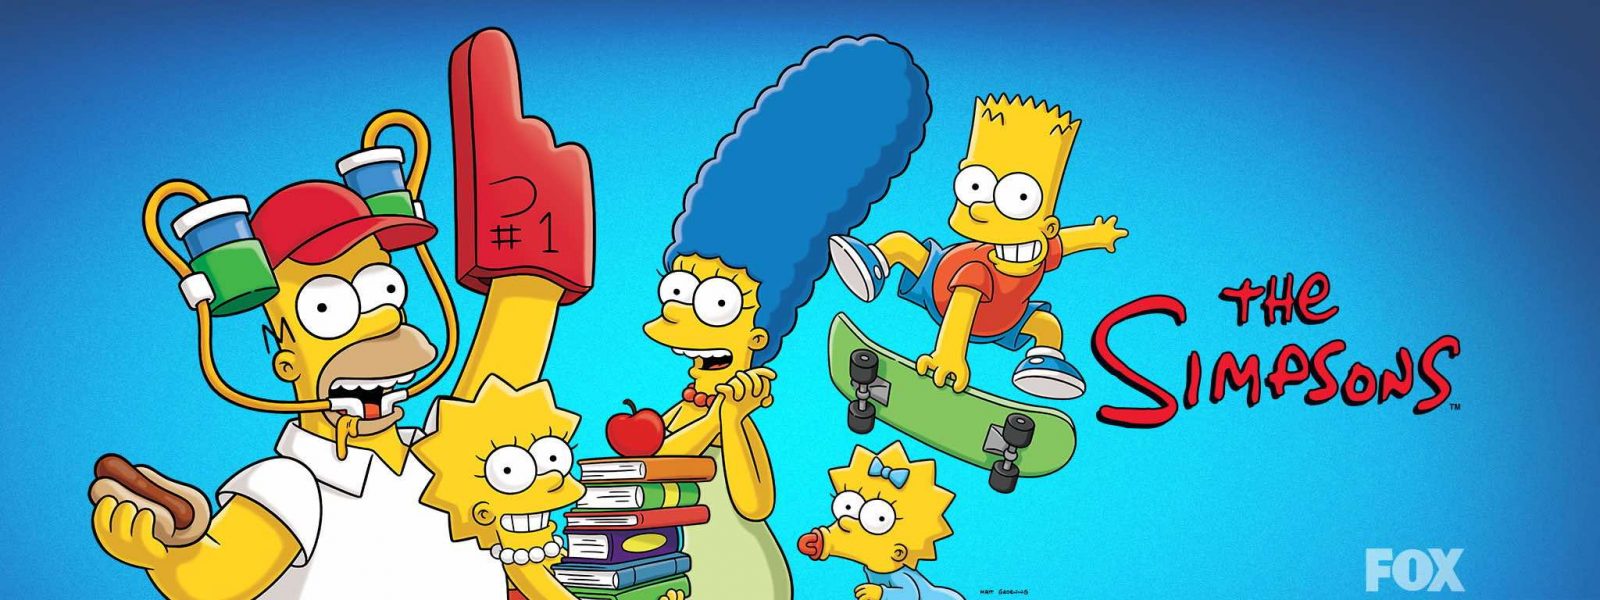 What Does Your Taste in Classic TV Shows Say About You? The Simpsons